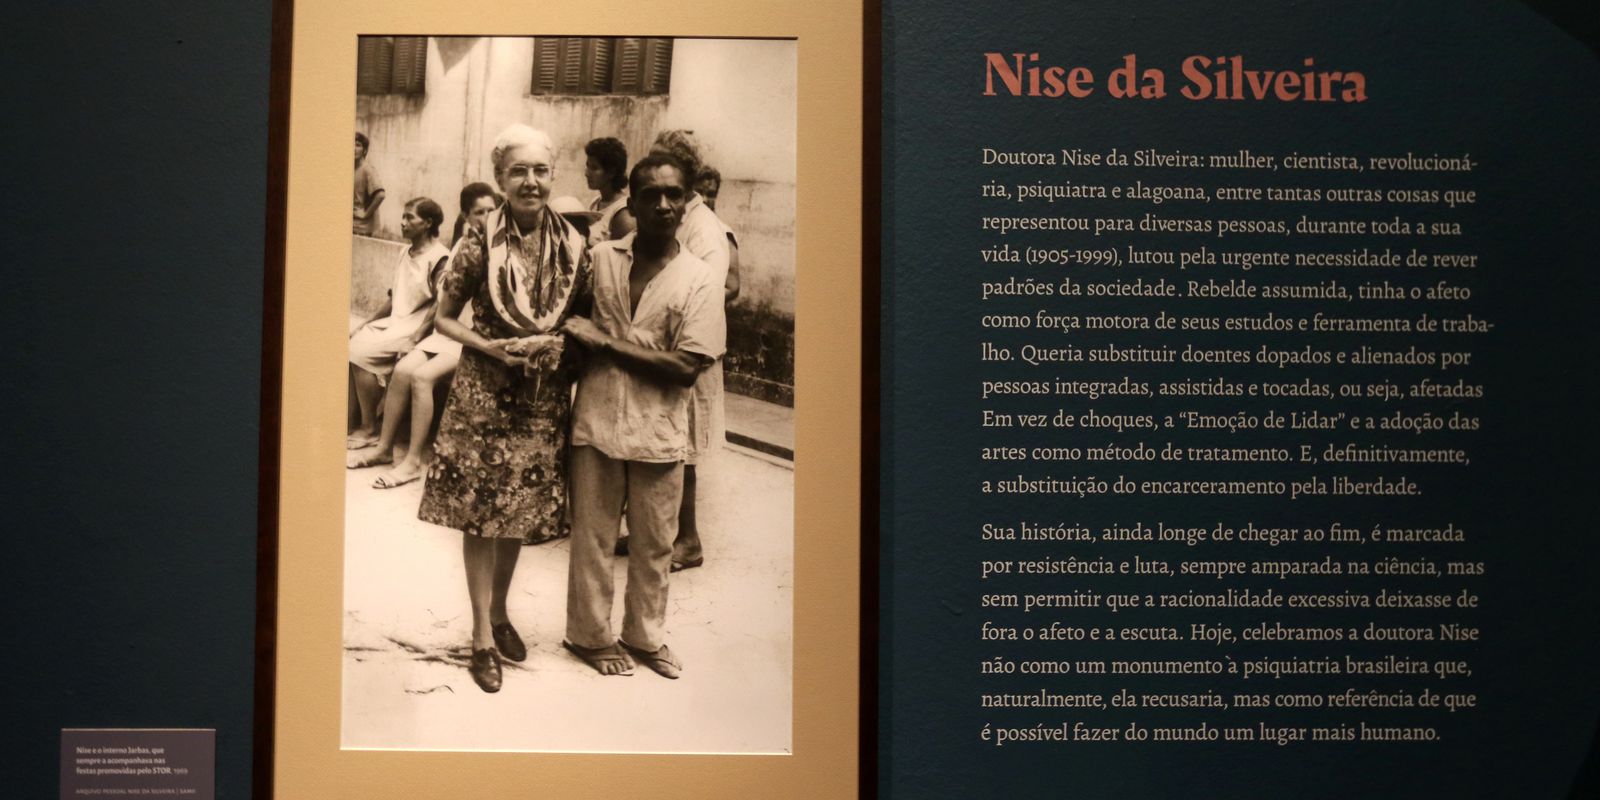 President vetoes appointment of Nise da Silveira as Heroine of the Fatherland